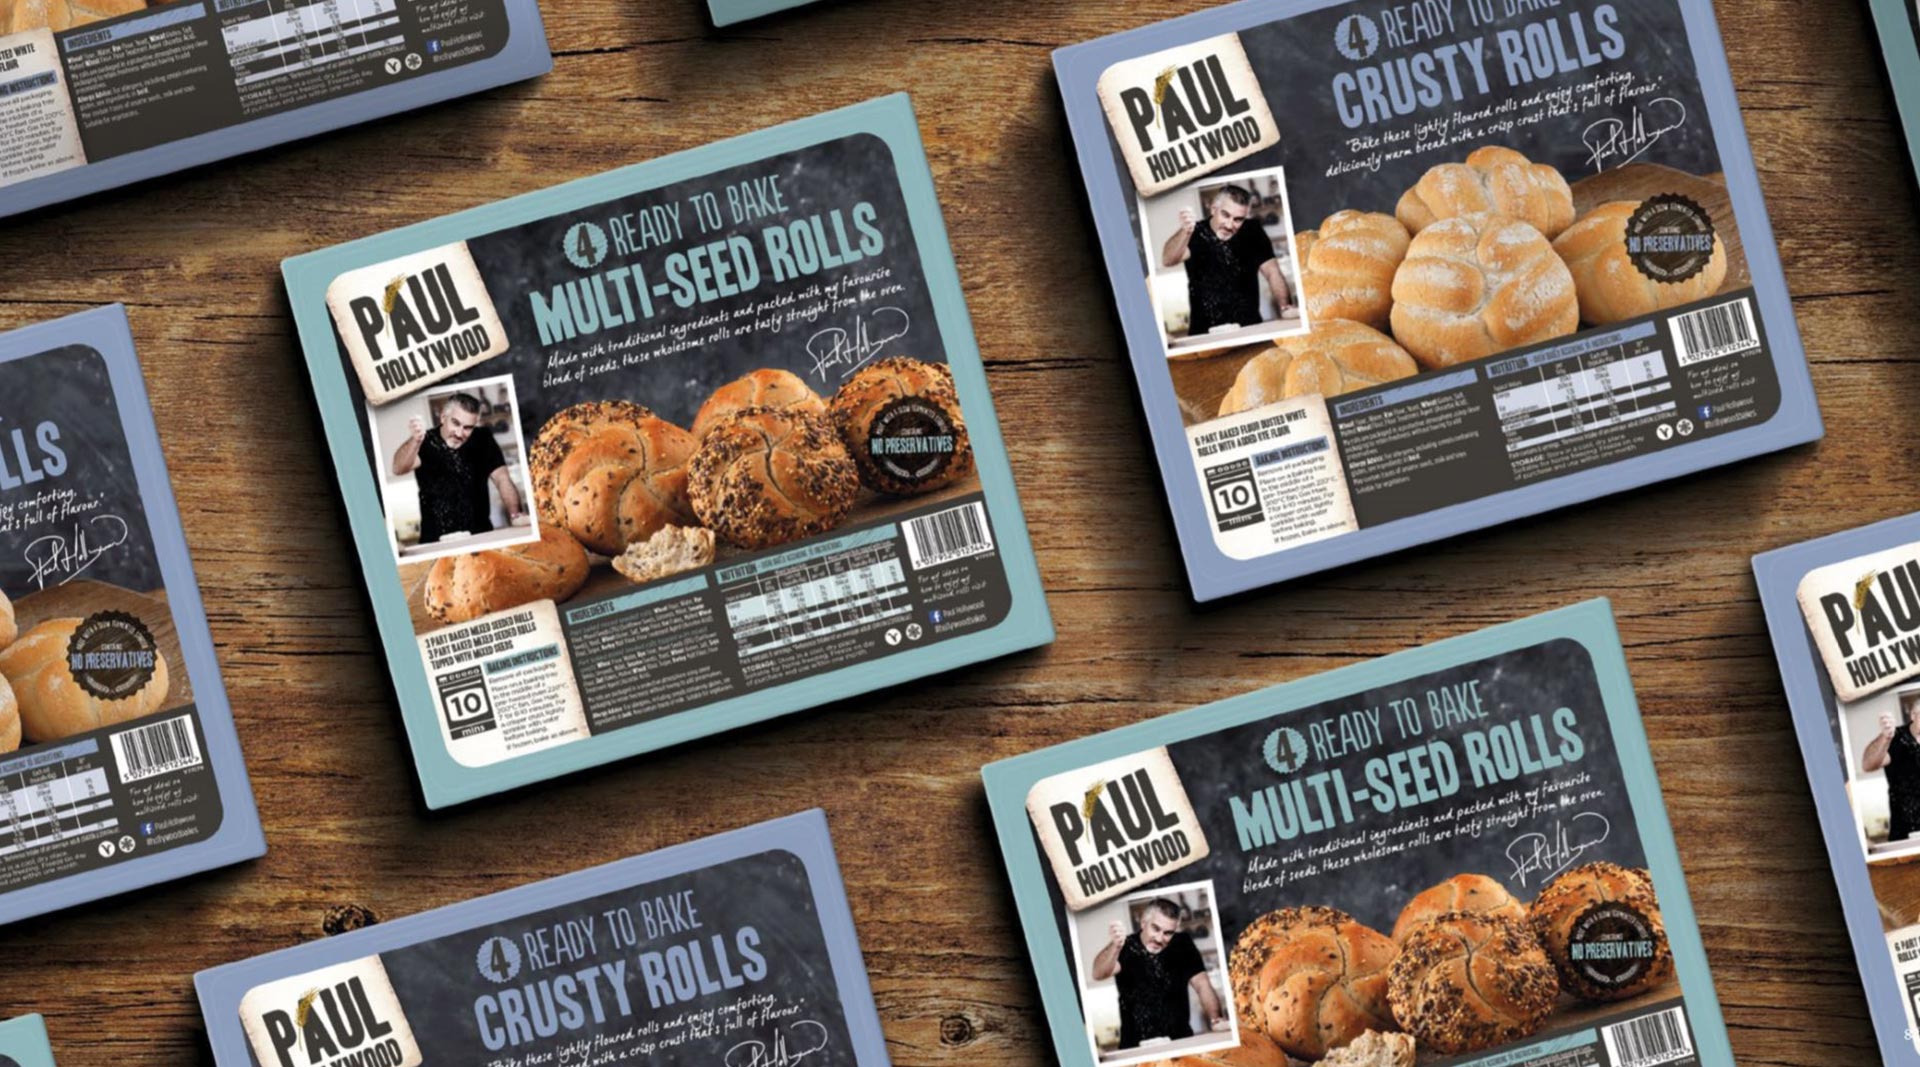 Paul Hollywood products